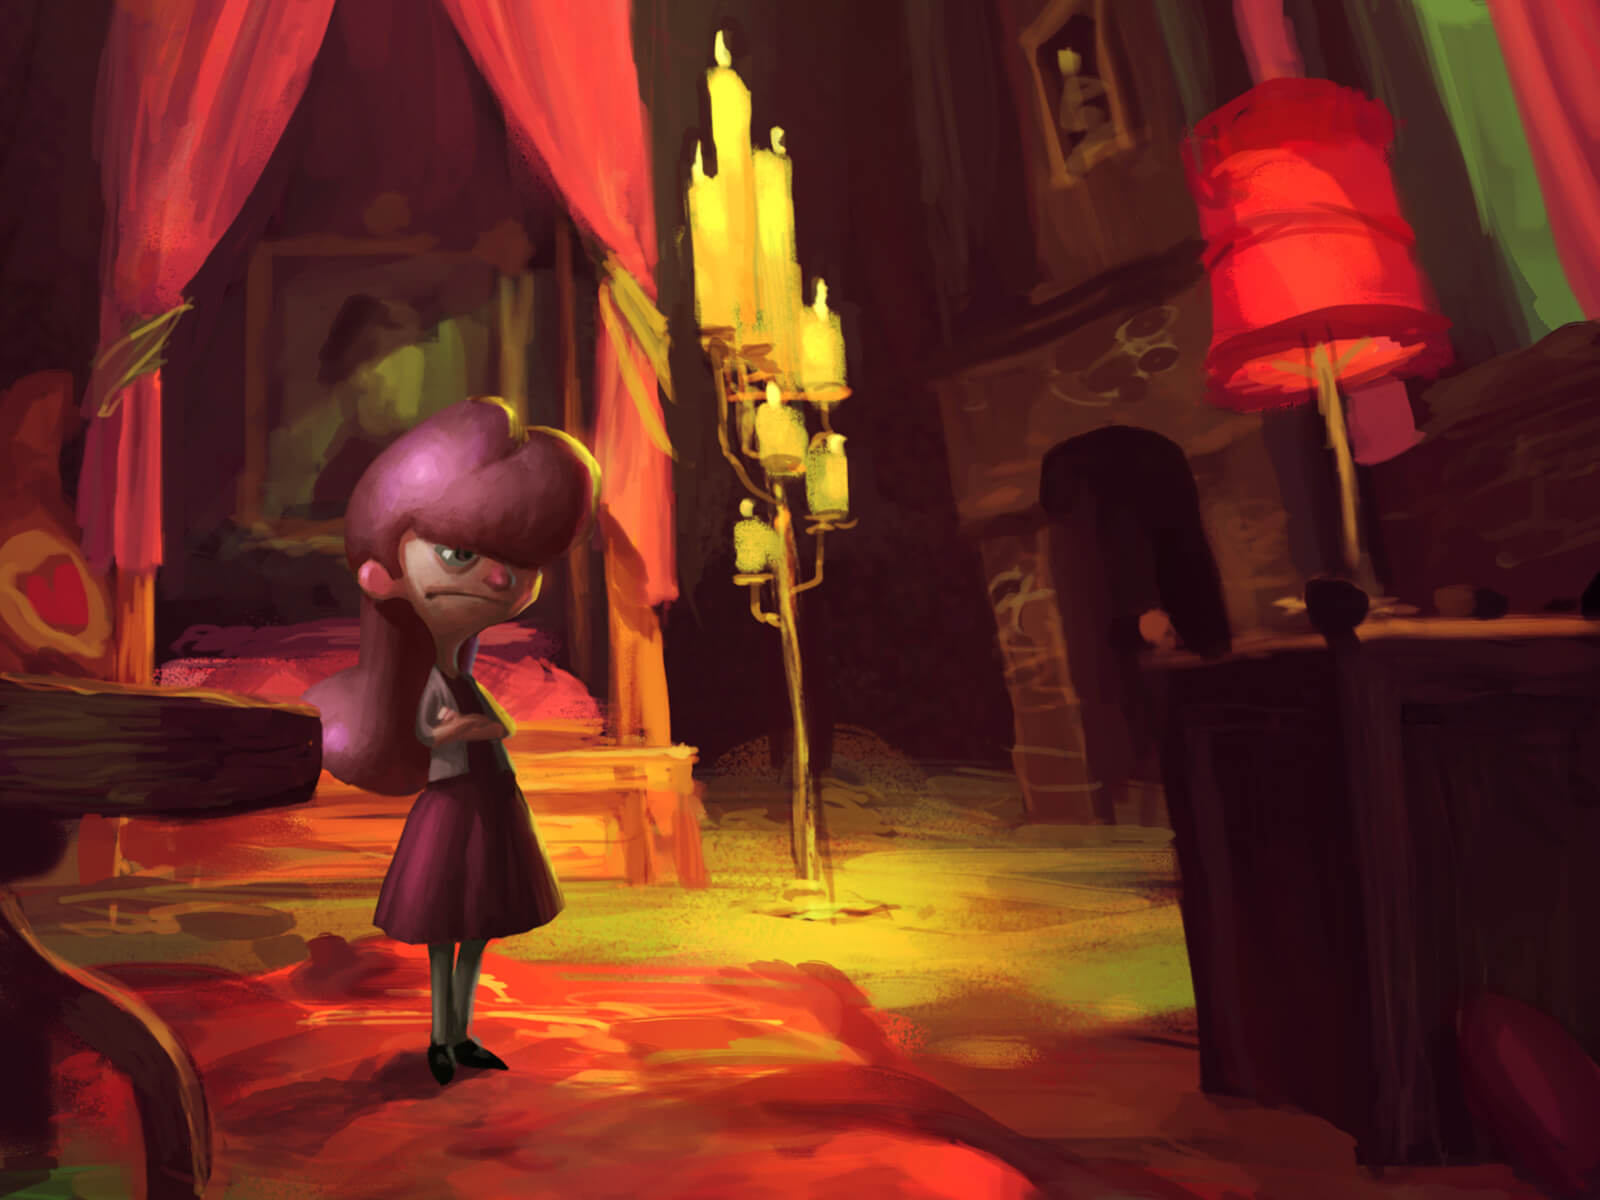 A young girl with an annoyed look stands in a cavernous, candlelit bedroom. Her hair, dress, and furnishings are colored pink